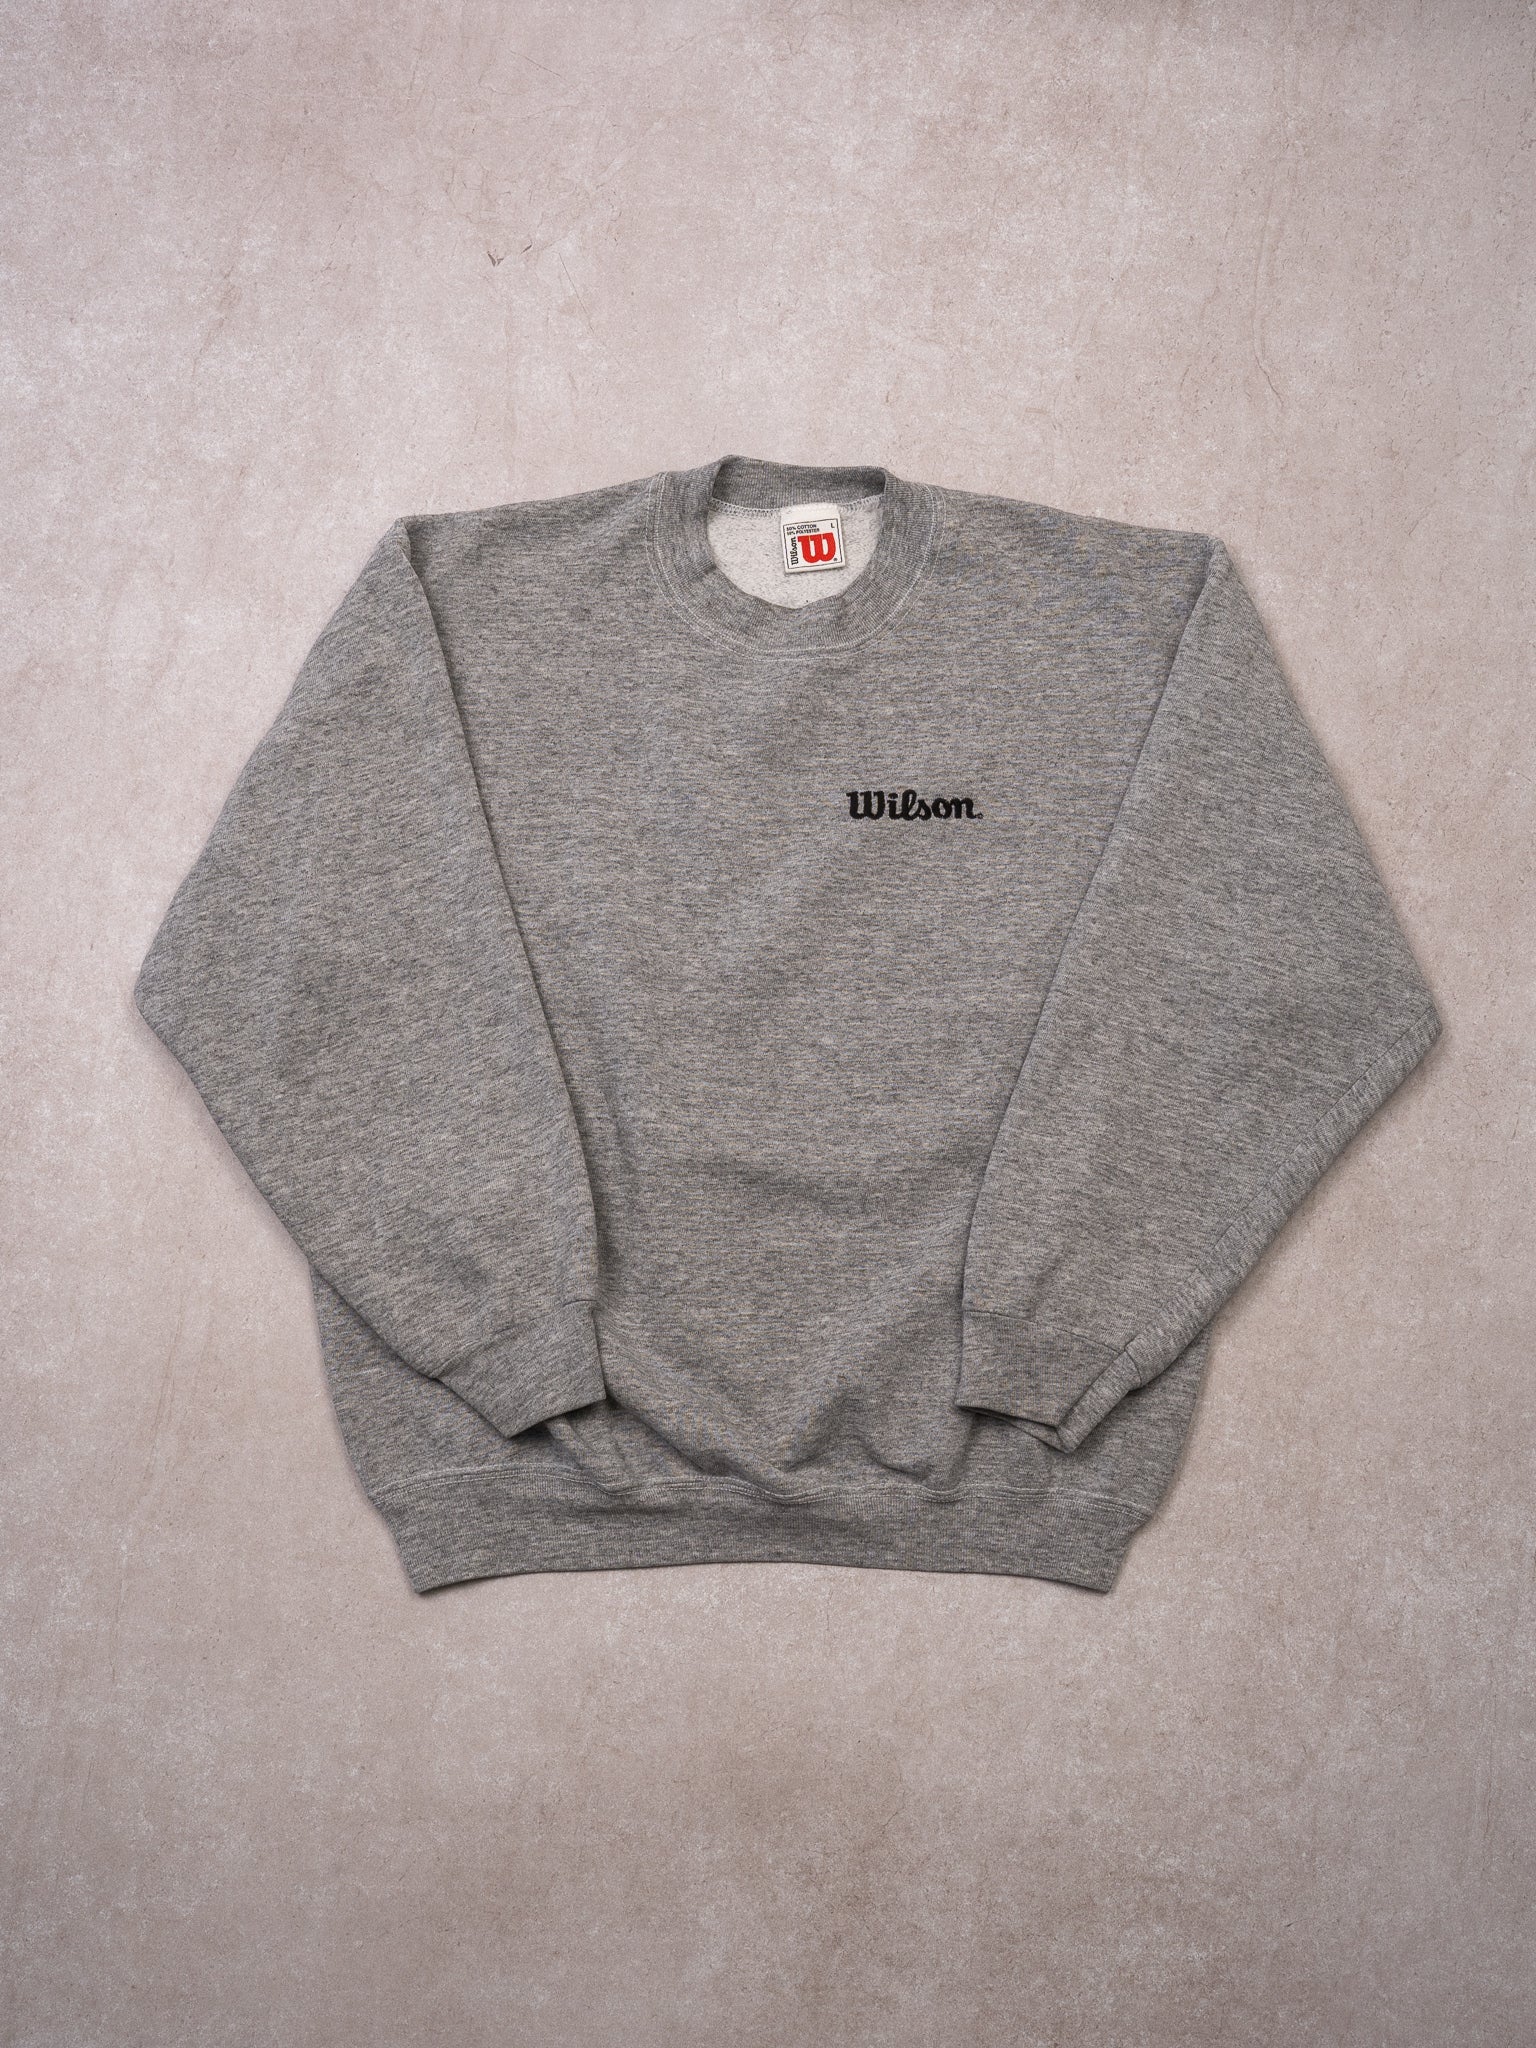 Vintage 90s Grey Wilson Spell Out Crewneck (L)